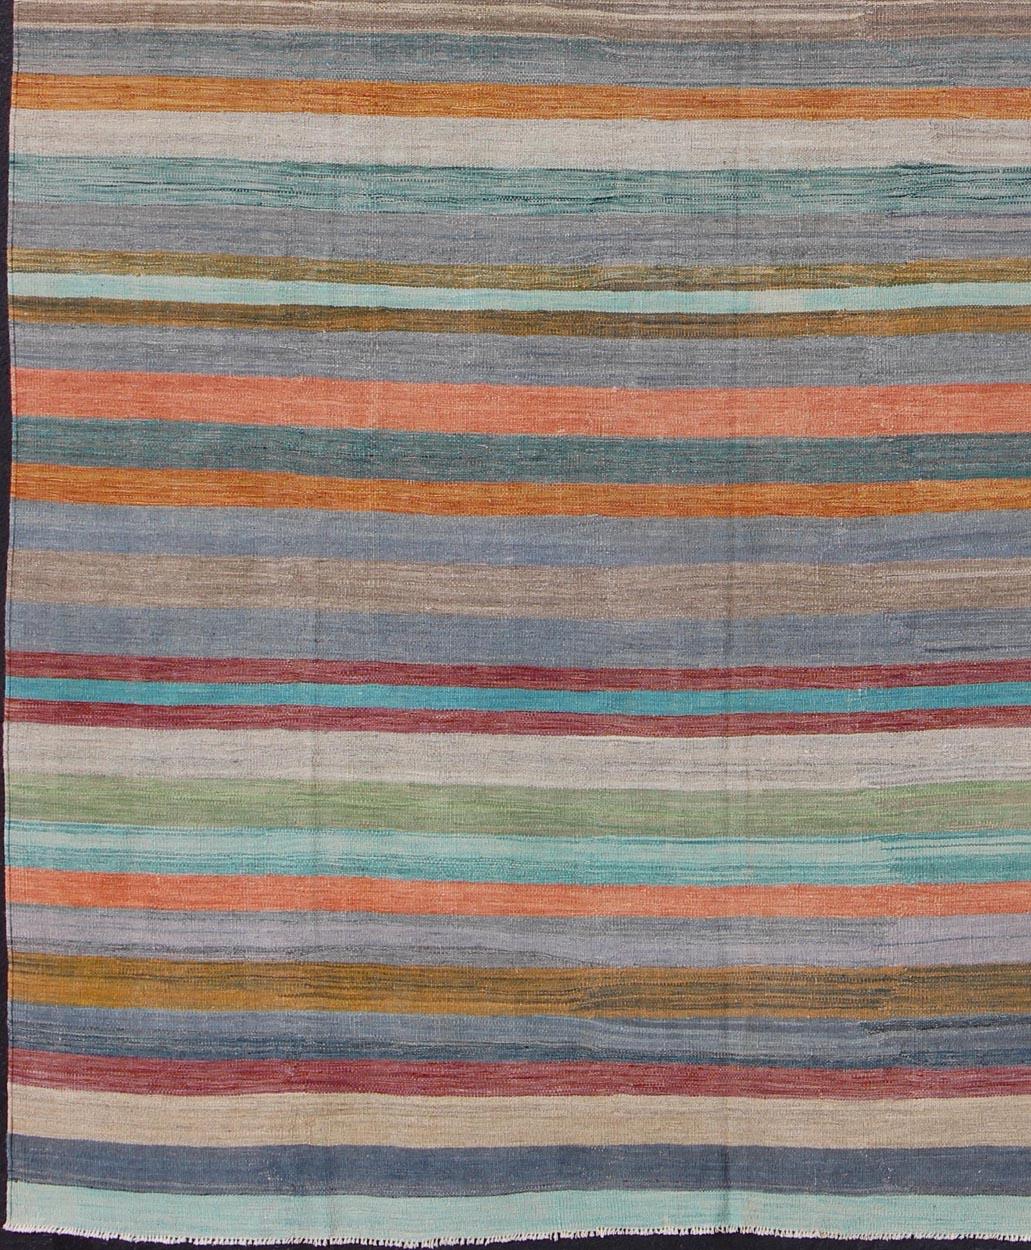 Casual flat-weave Kilim rug with rainbow colors in Classic stripe design, rug afg-14936, country of origin / type: Afghanistan / Kilim
Colorful flat-weave modern Kilim rug with Classic stripes for Modern Interiors.
This fun and vibrant kilim rug